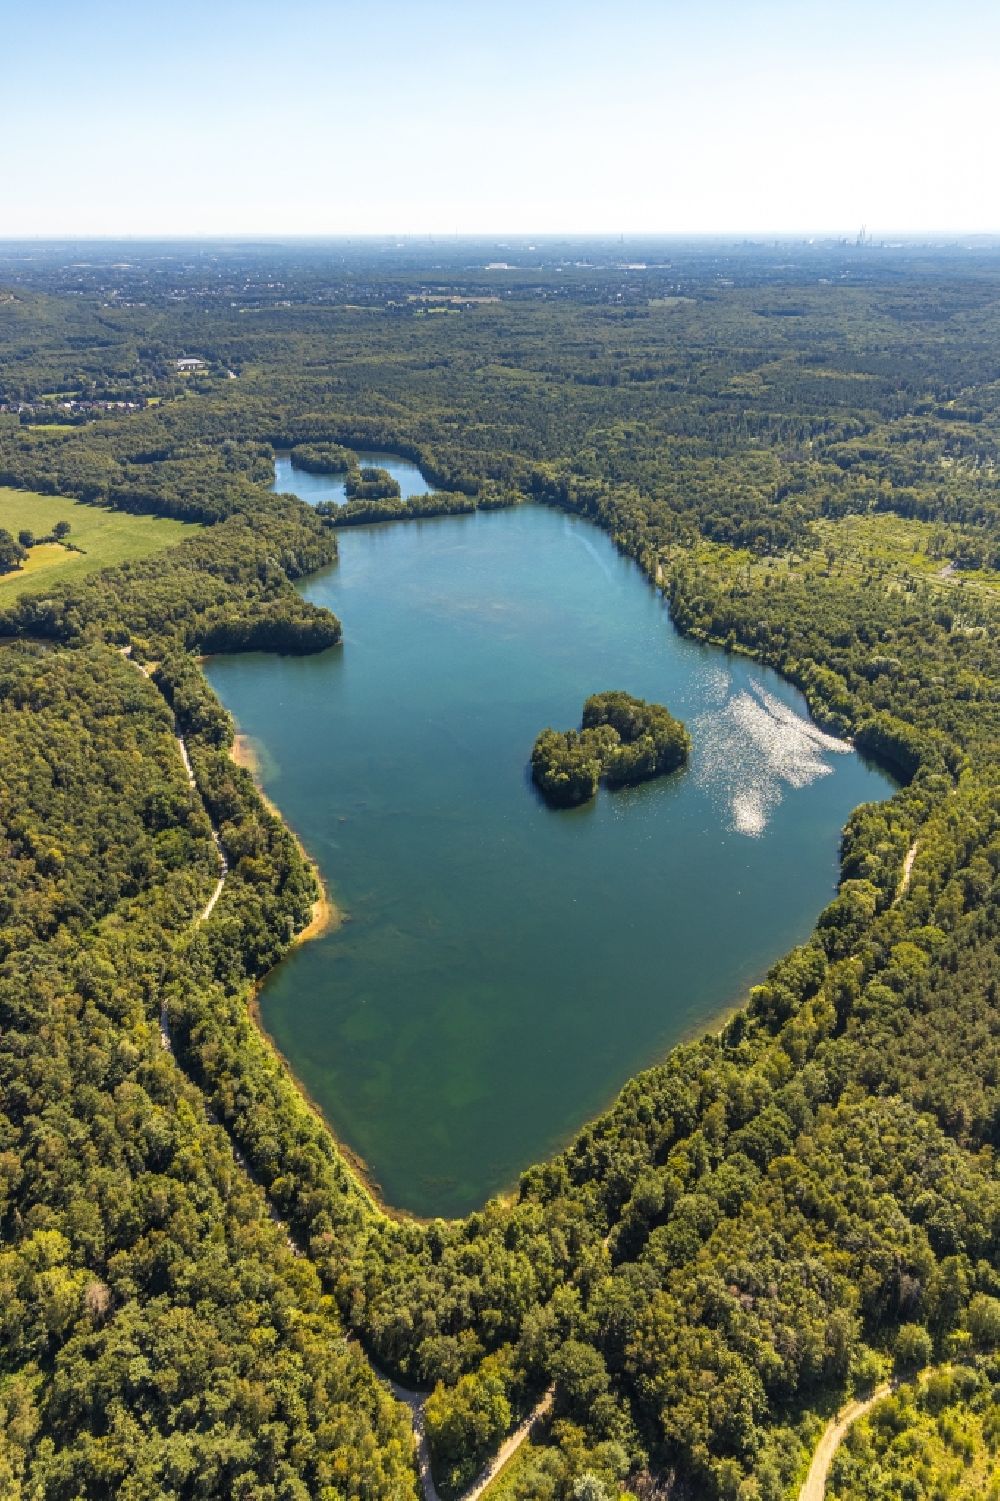 Bottrop from the bird's eye view: Forests on the shores of Lake Heidesee in Bottrop in the state North Rhine-Westphalia, Germany